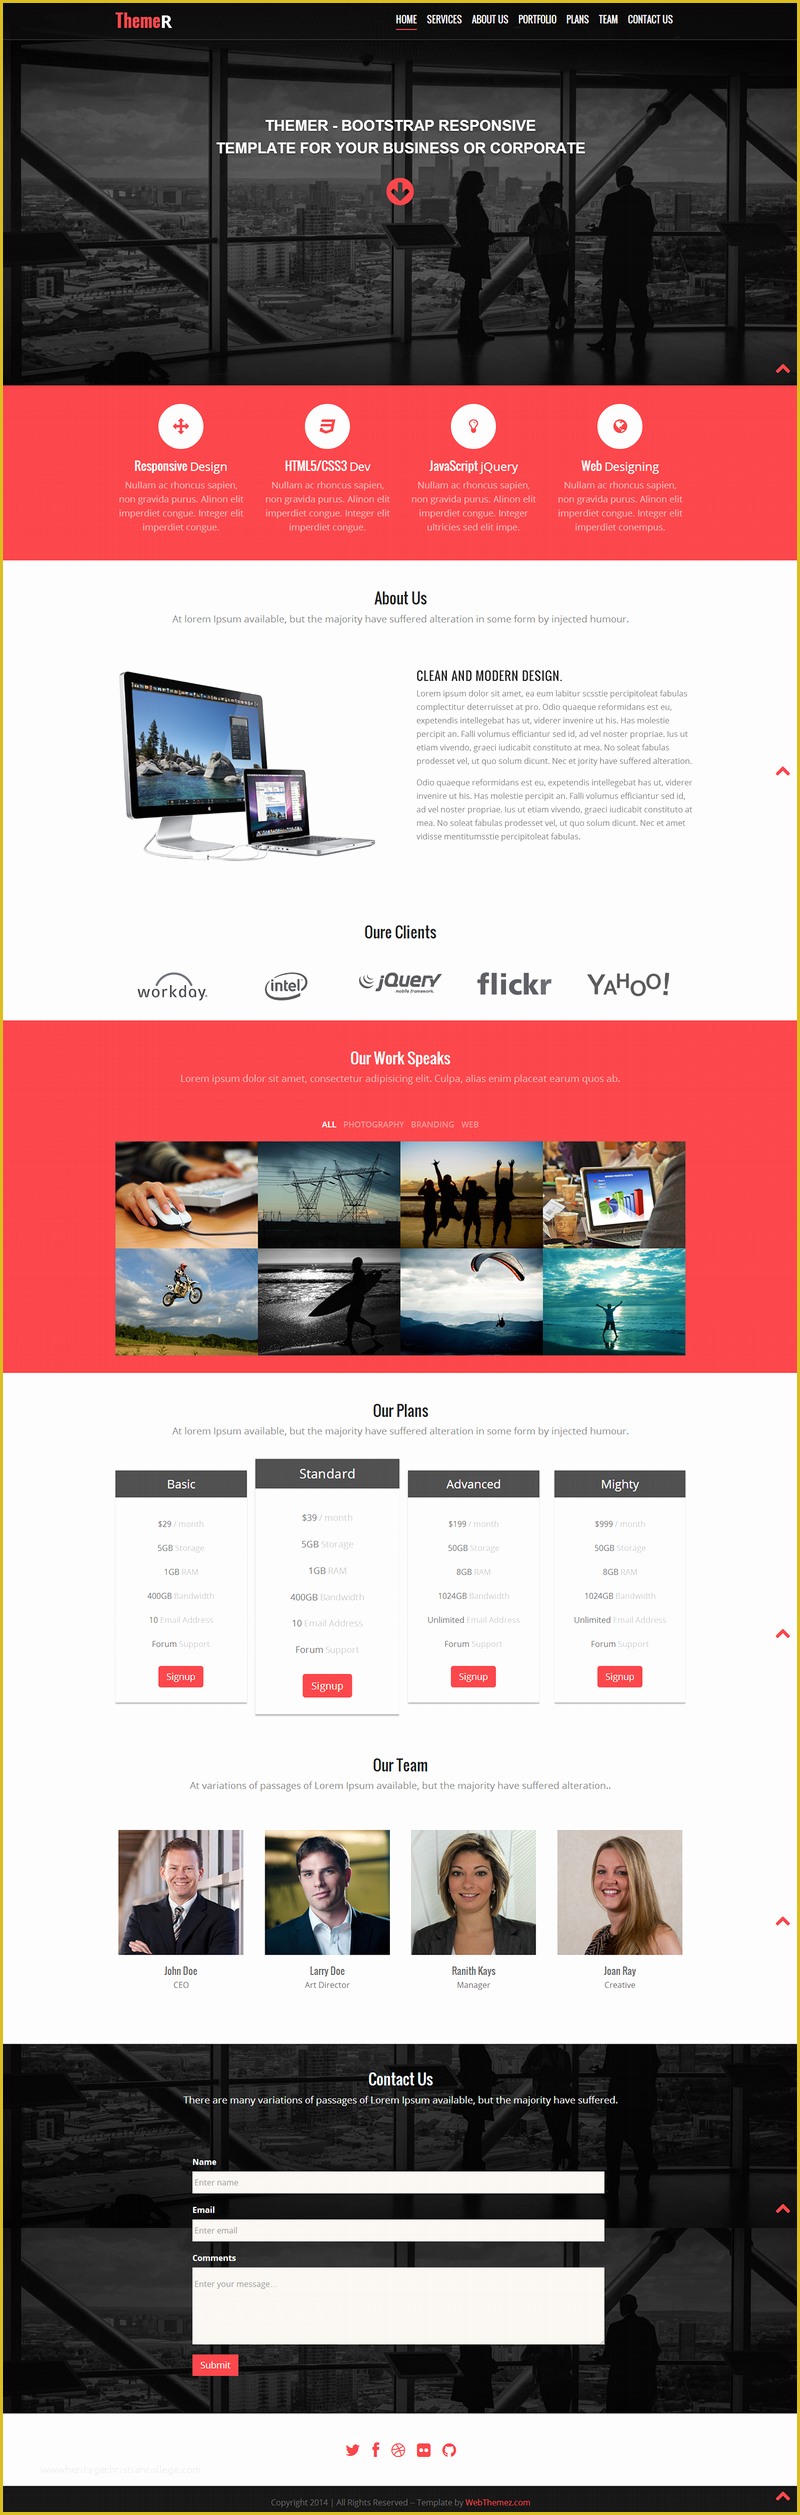 Top Free Jquery Templates for Websites Of 10 Best Free Website HTML5 Templates – August 2014